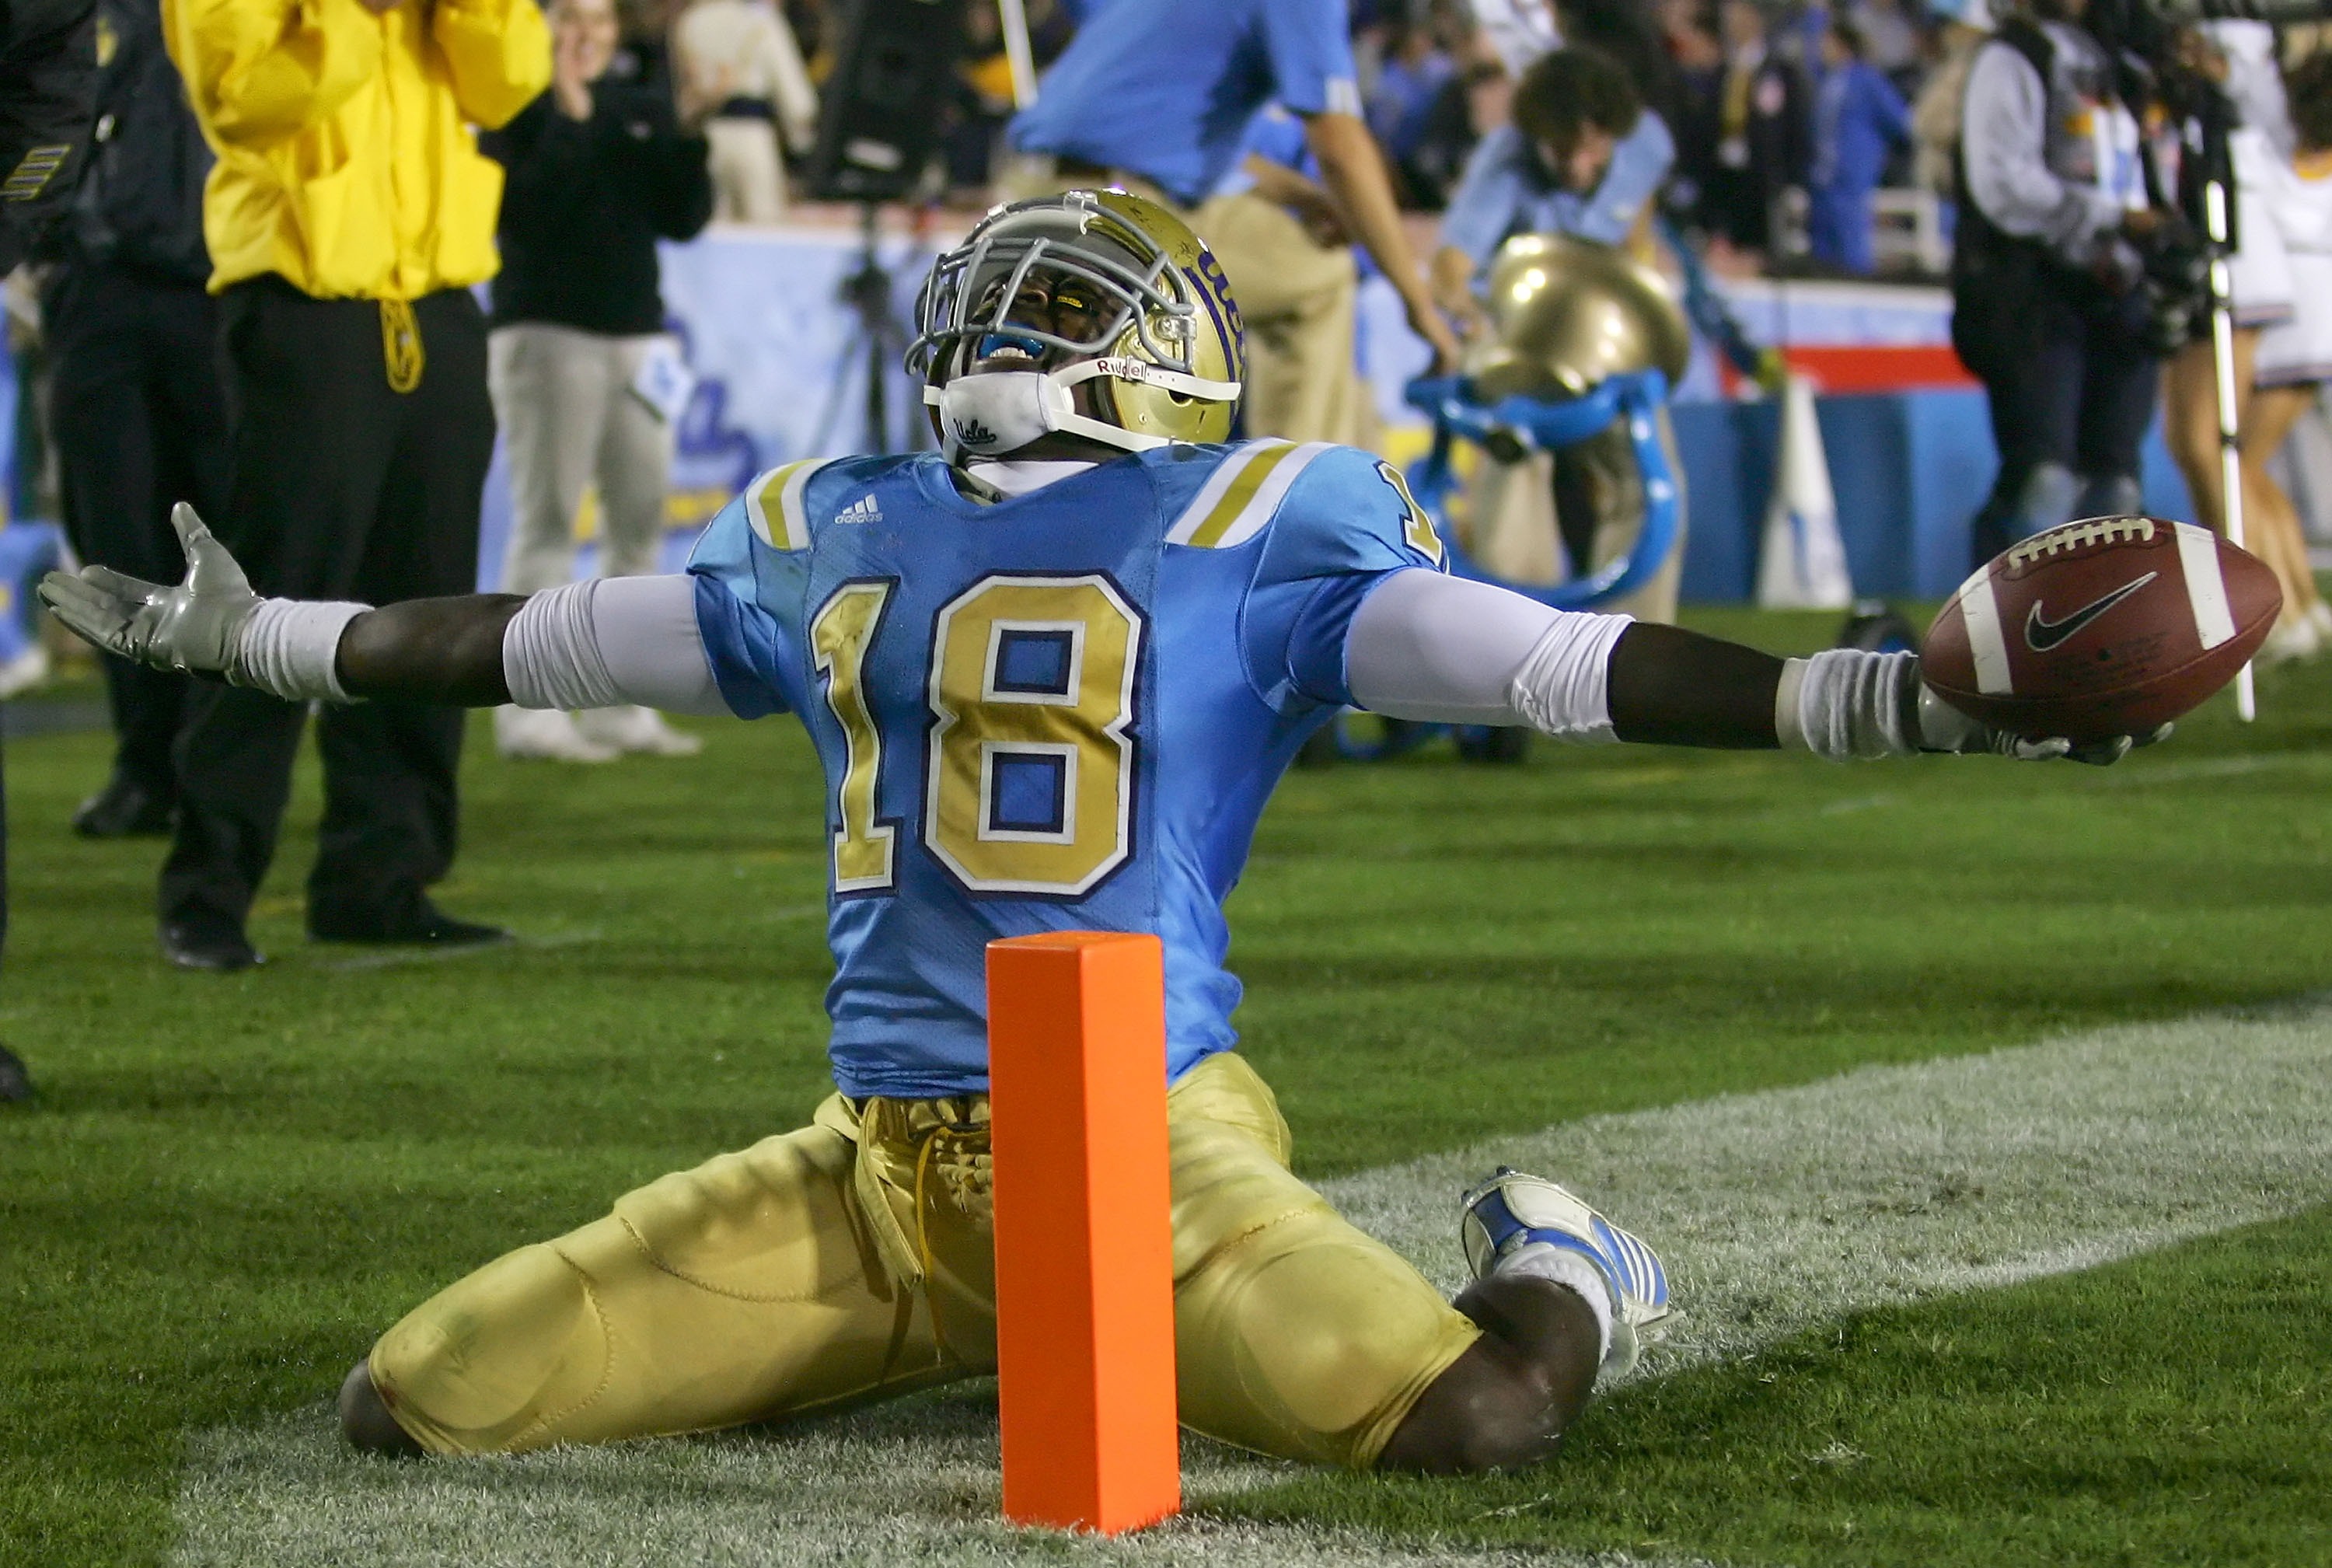 UCLA's Matthew Slater celebrates after scoring a touchdown during the 2007 season. (Photo by Lisa Blumenfeld/Getty Images)